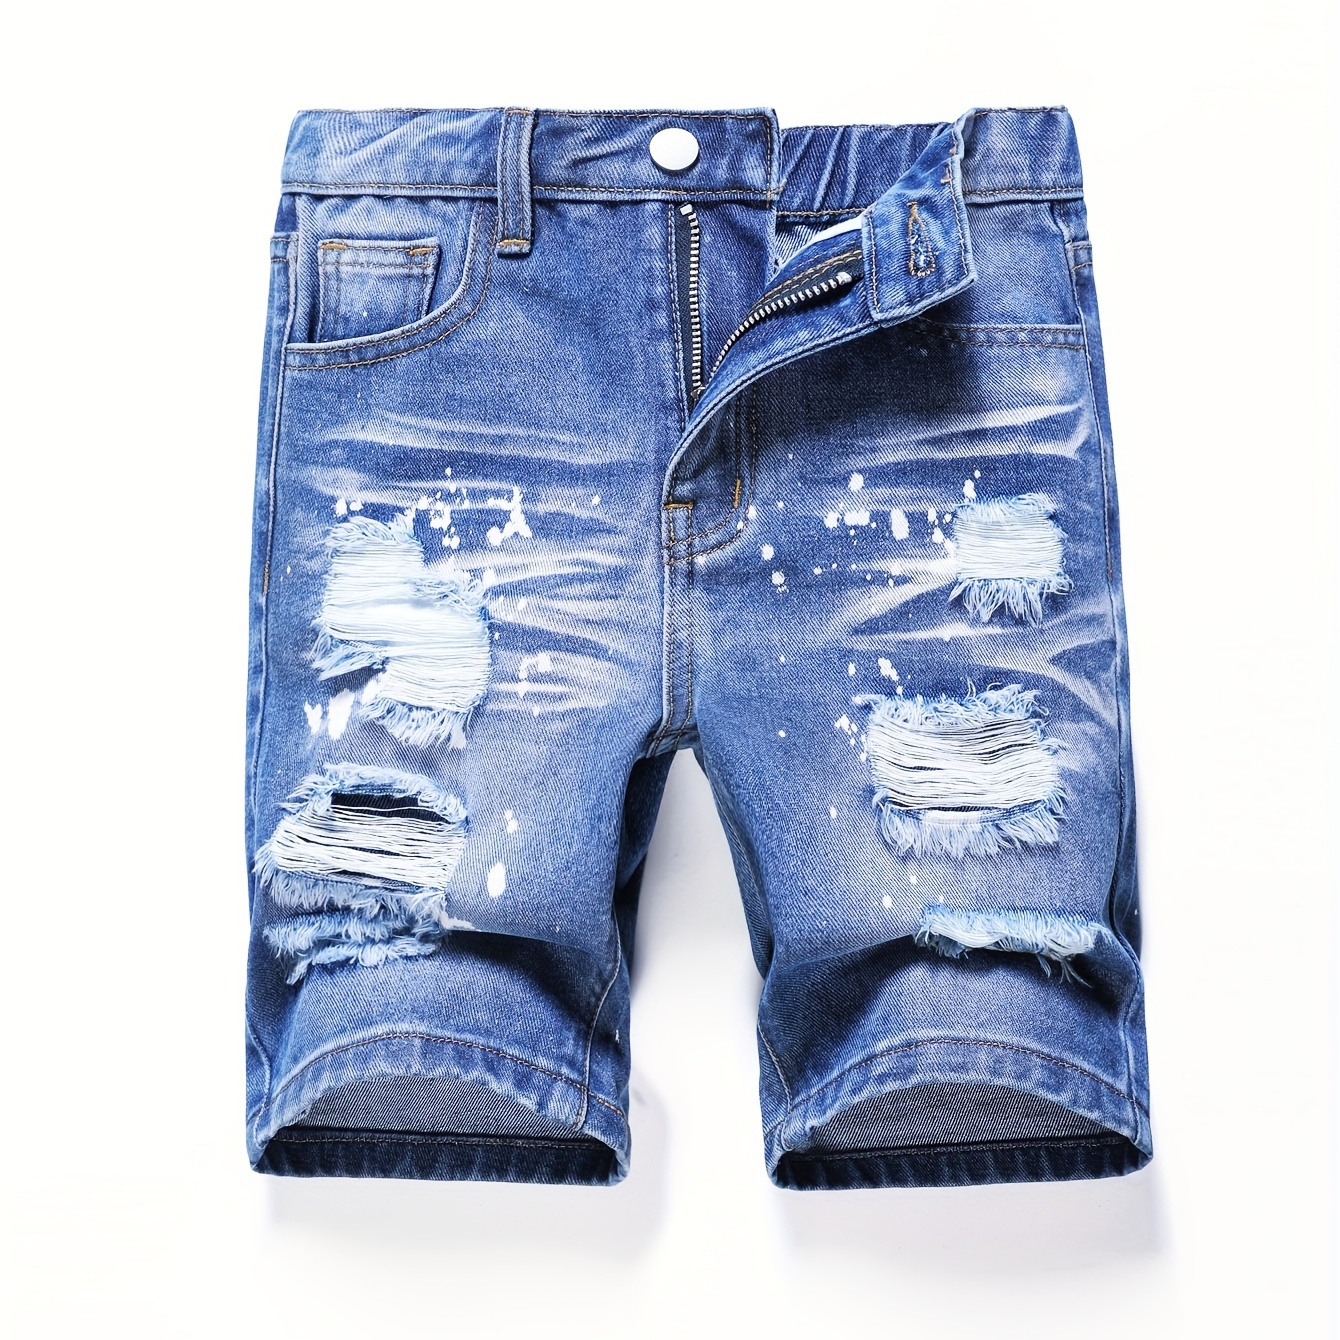 

Boys Casual Comfortable Ripped Denim Shorts With Pockets, Paint Splash Detail, Elastic Waist Shorts For Summer Outdoor